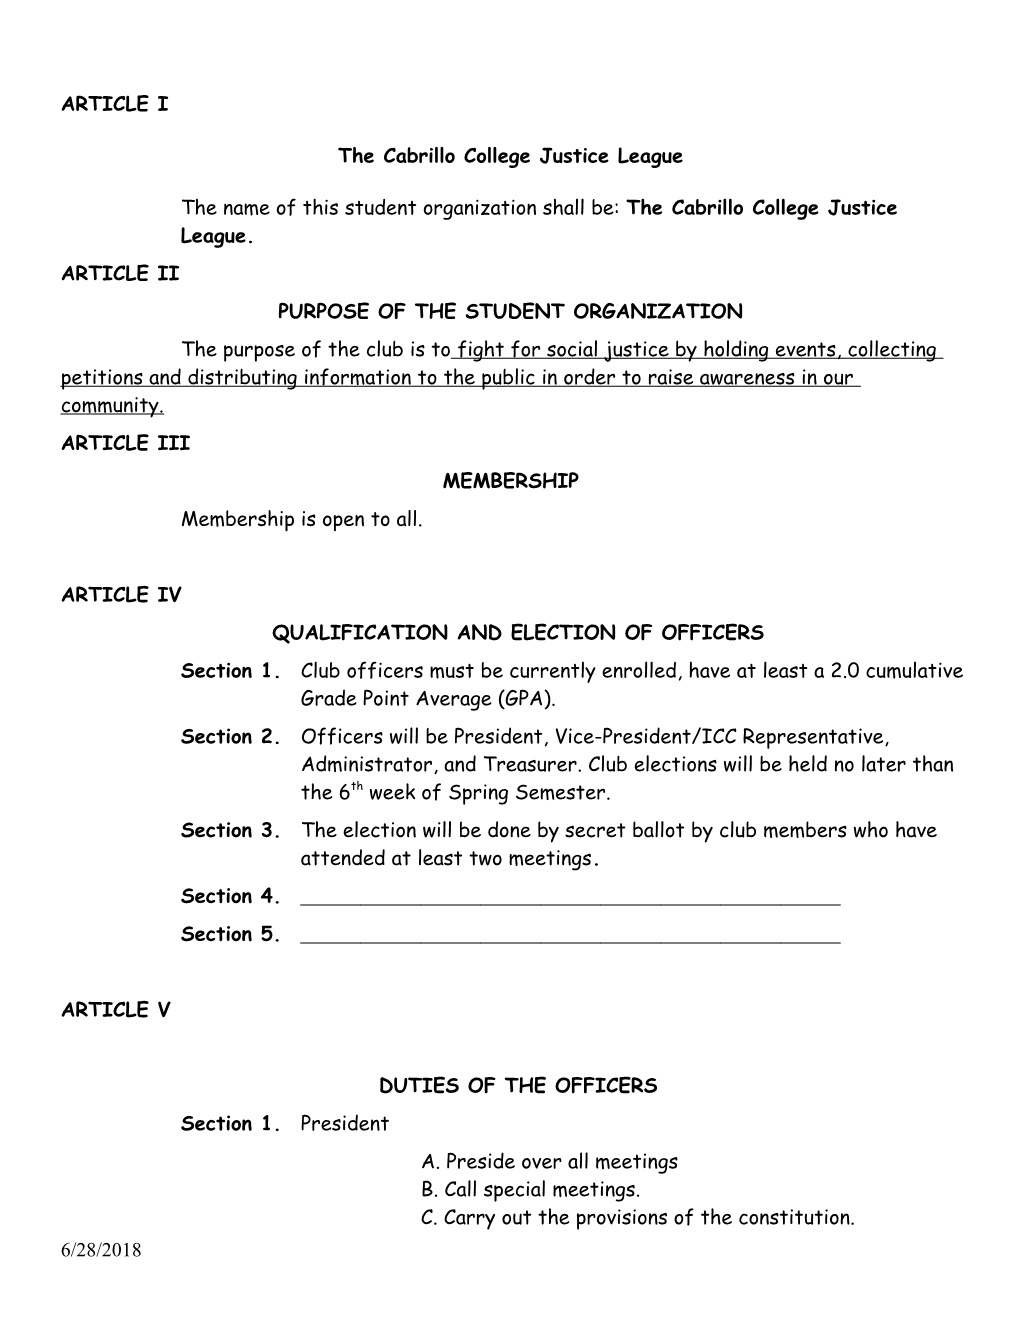 Sample Outline for a Constitution & Bylaws